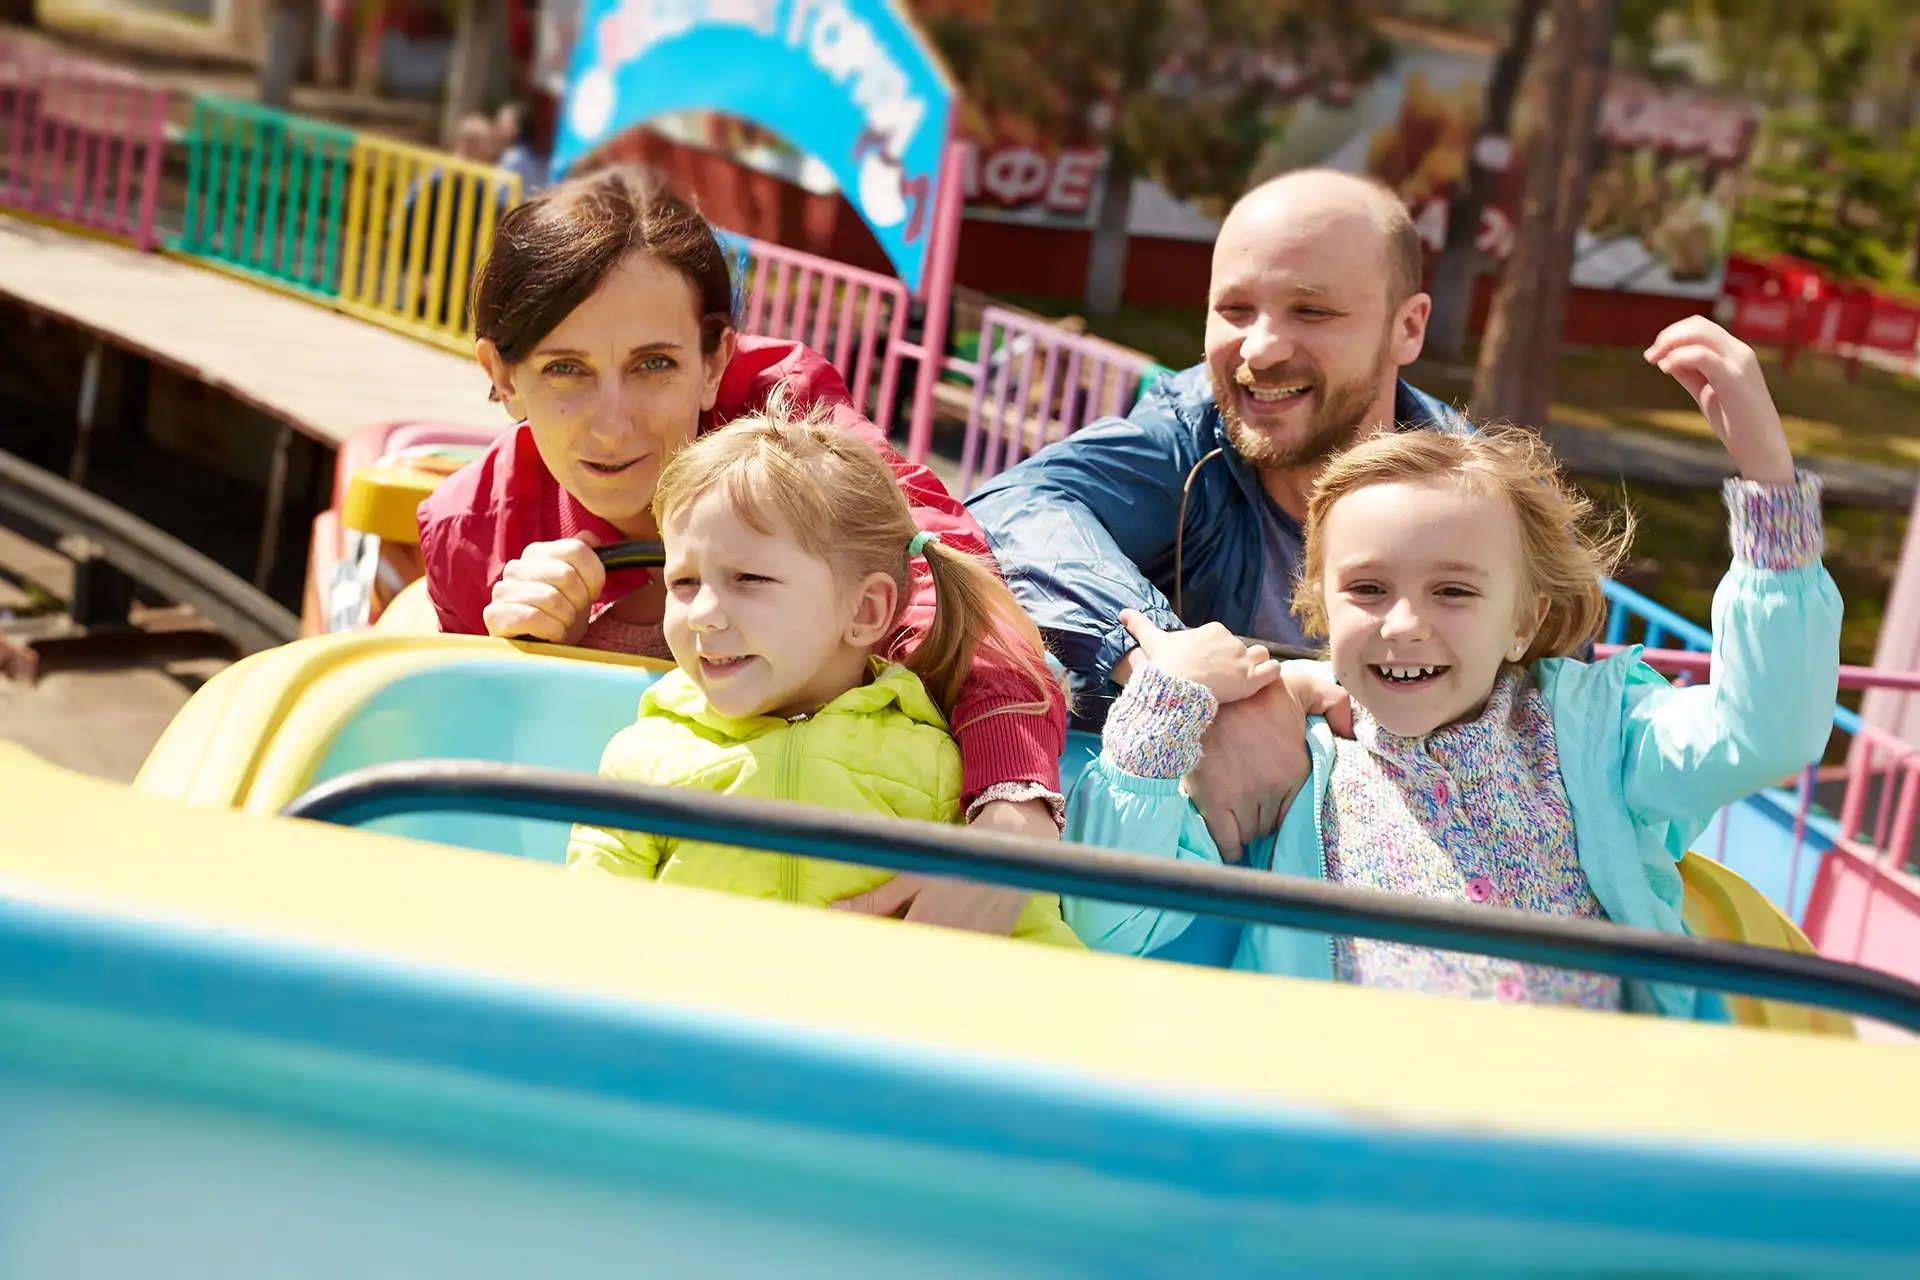 Family of Four at Amusement Park